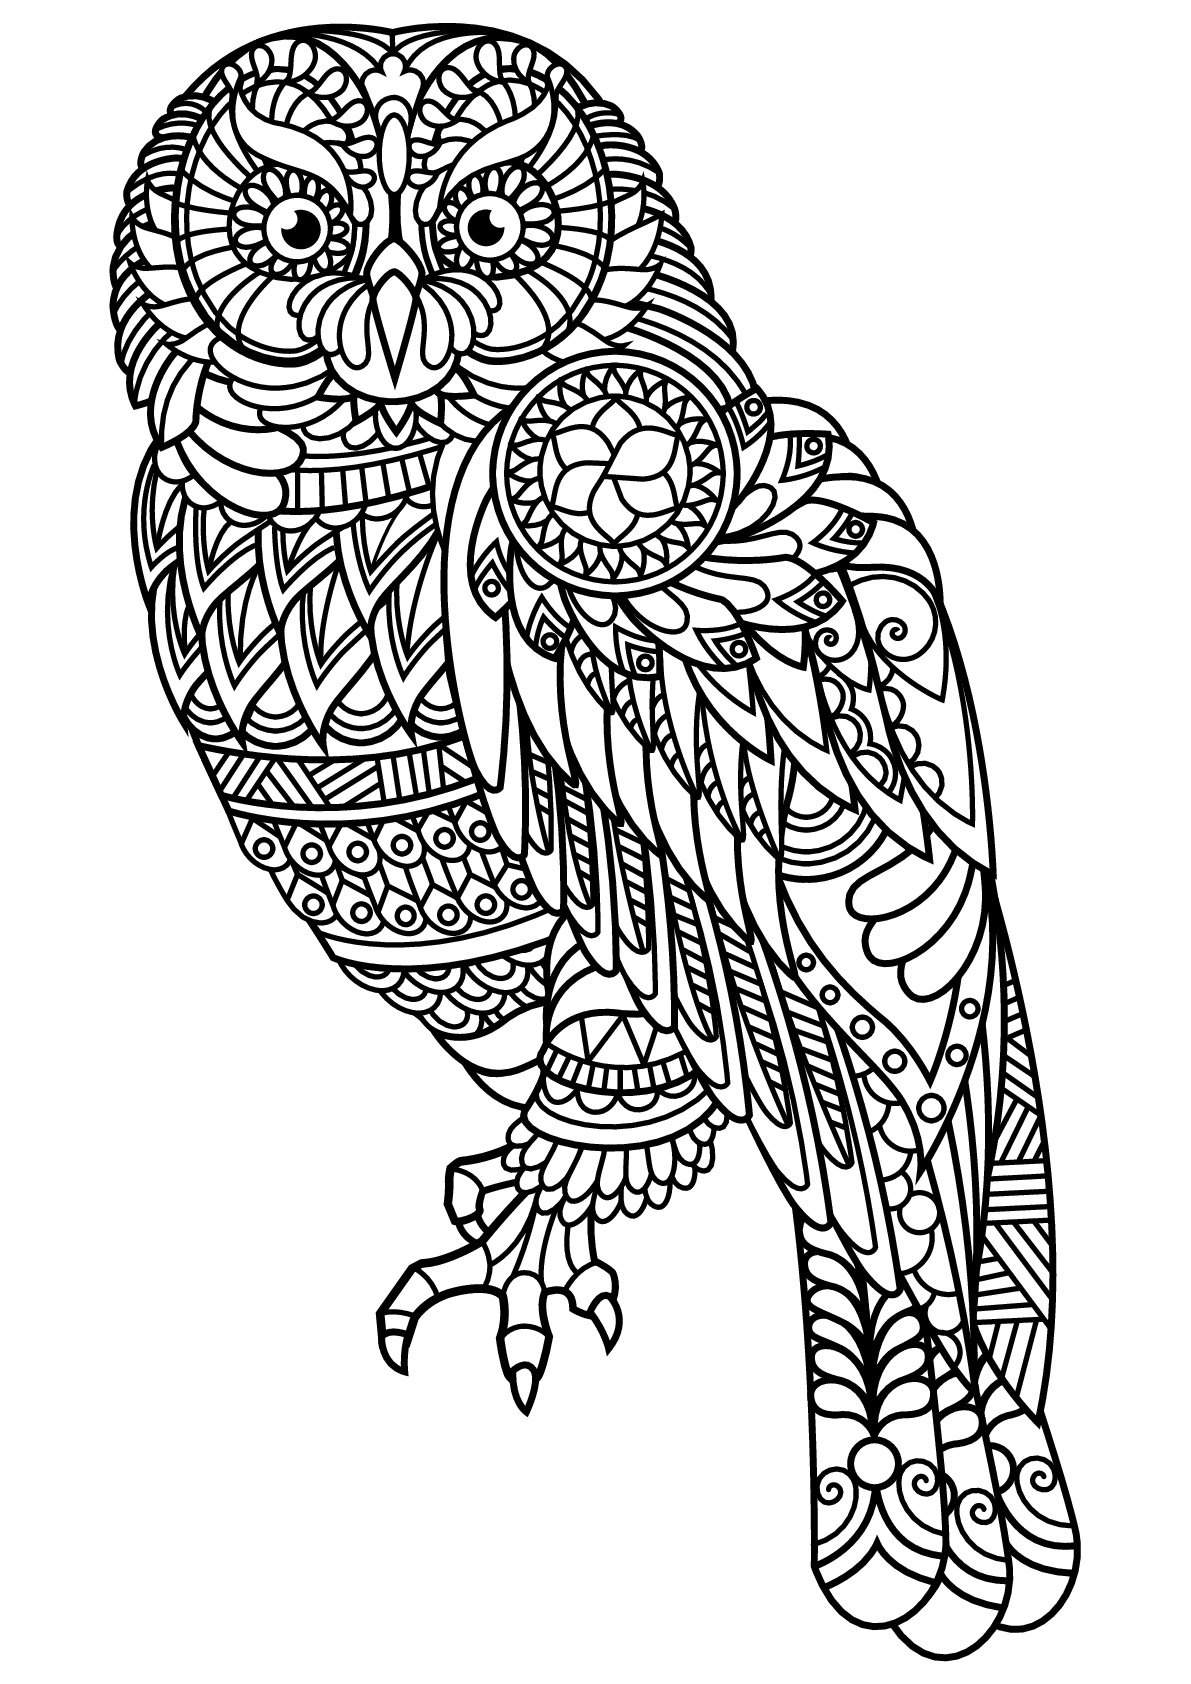 Free book owl - Owls Adult Coloring Pages